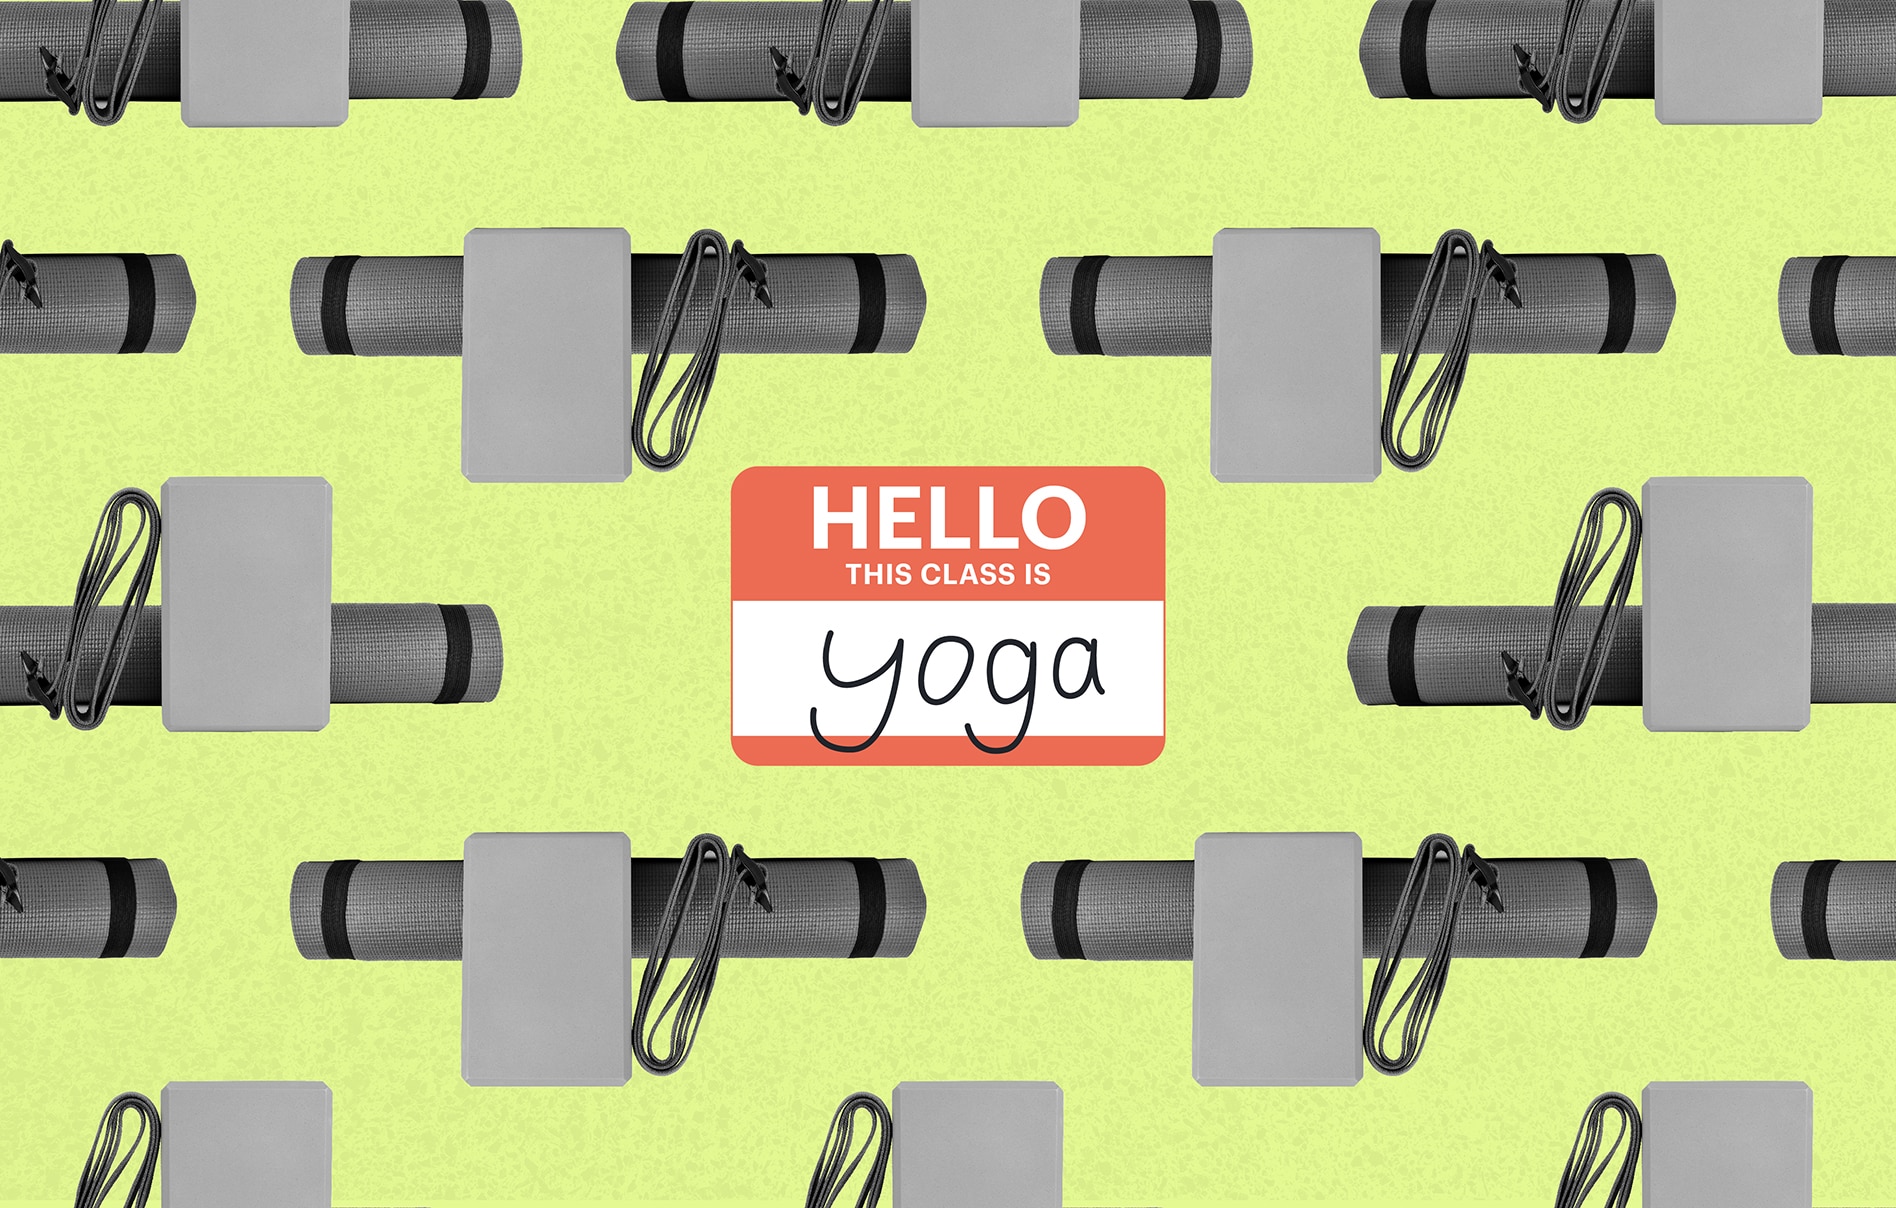 A name tag with the name written as "yoga" surrounded by yoga mats and blocks